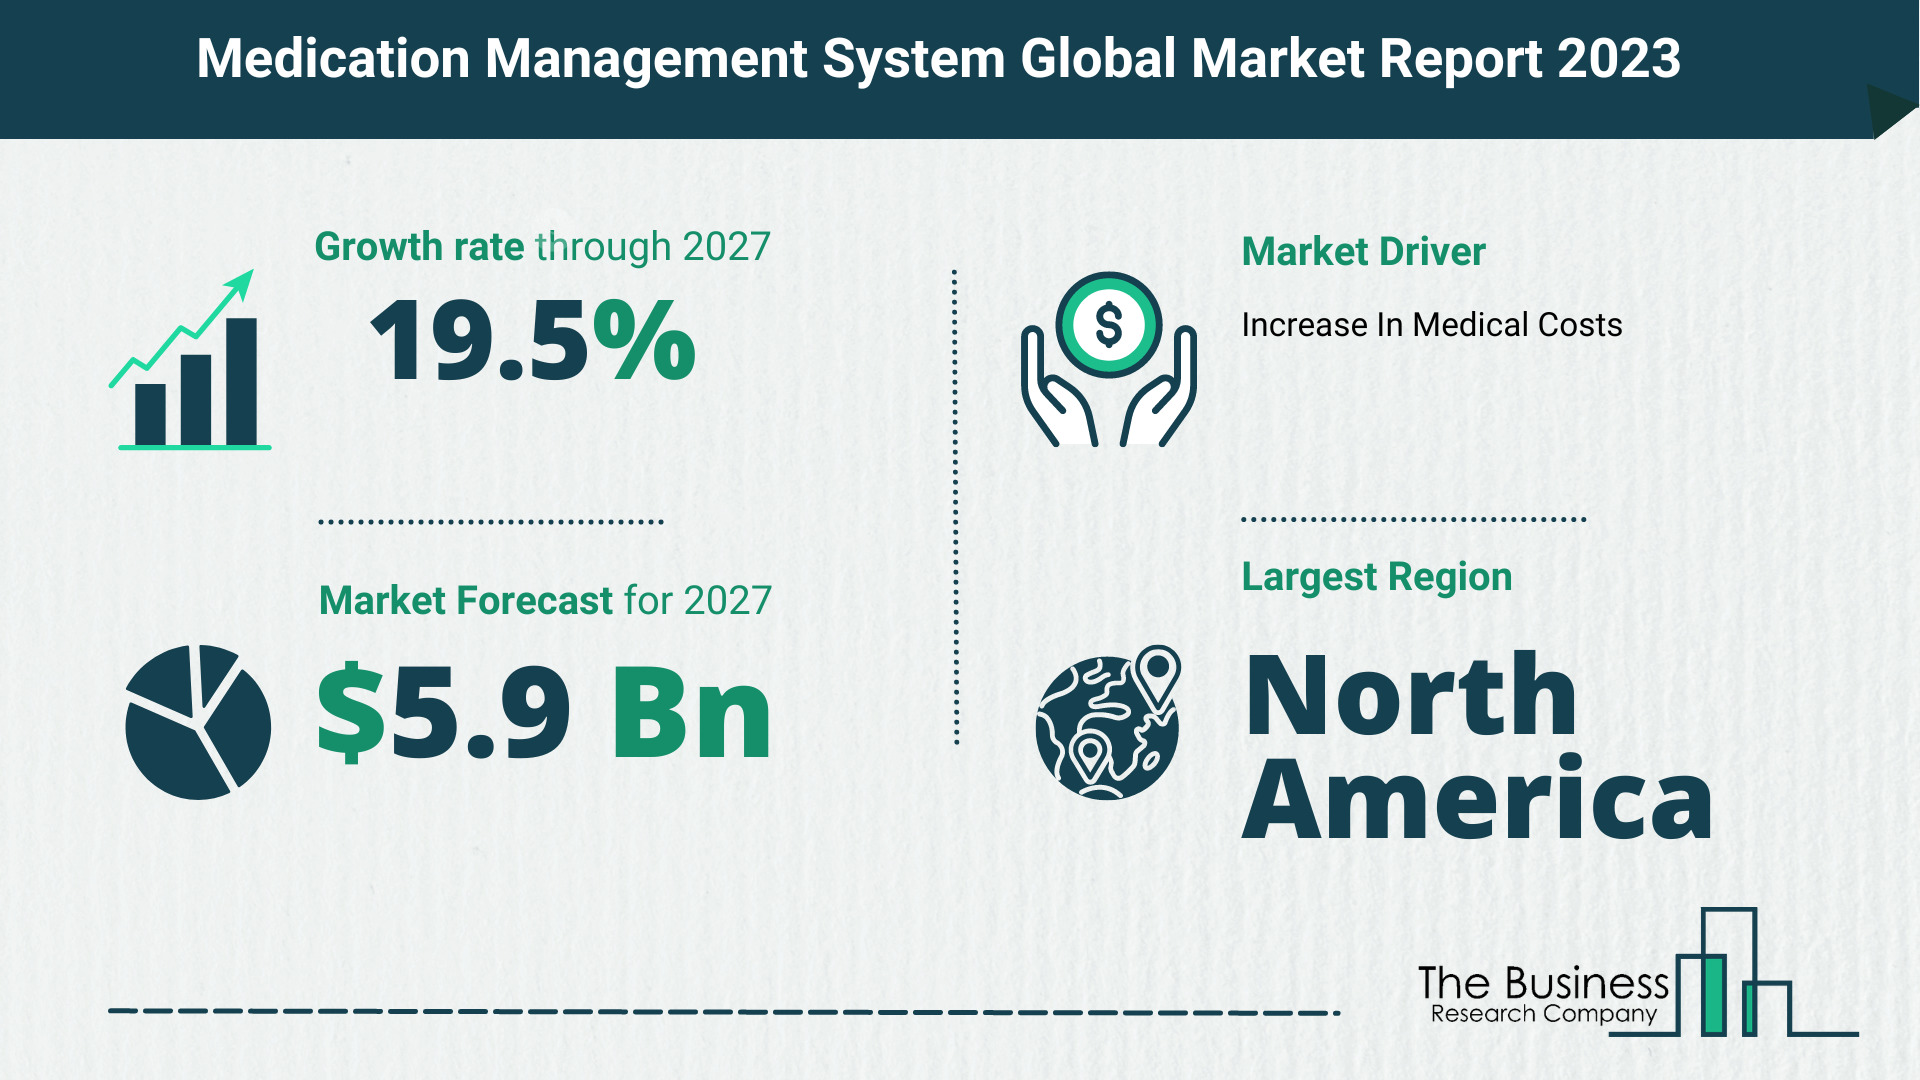 What Will The Medication Management System Market Look Like In 2023?